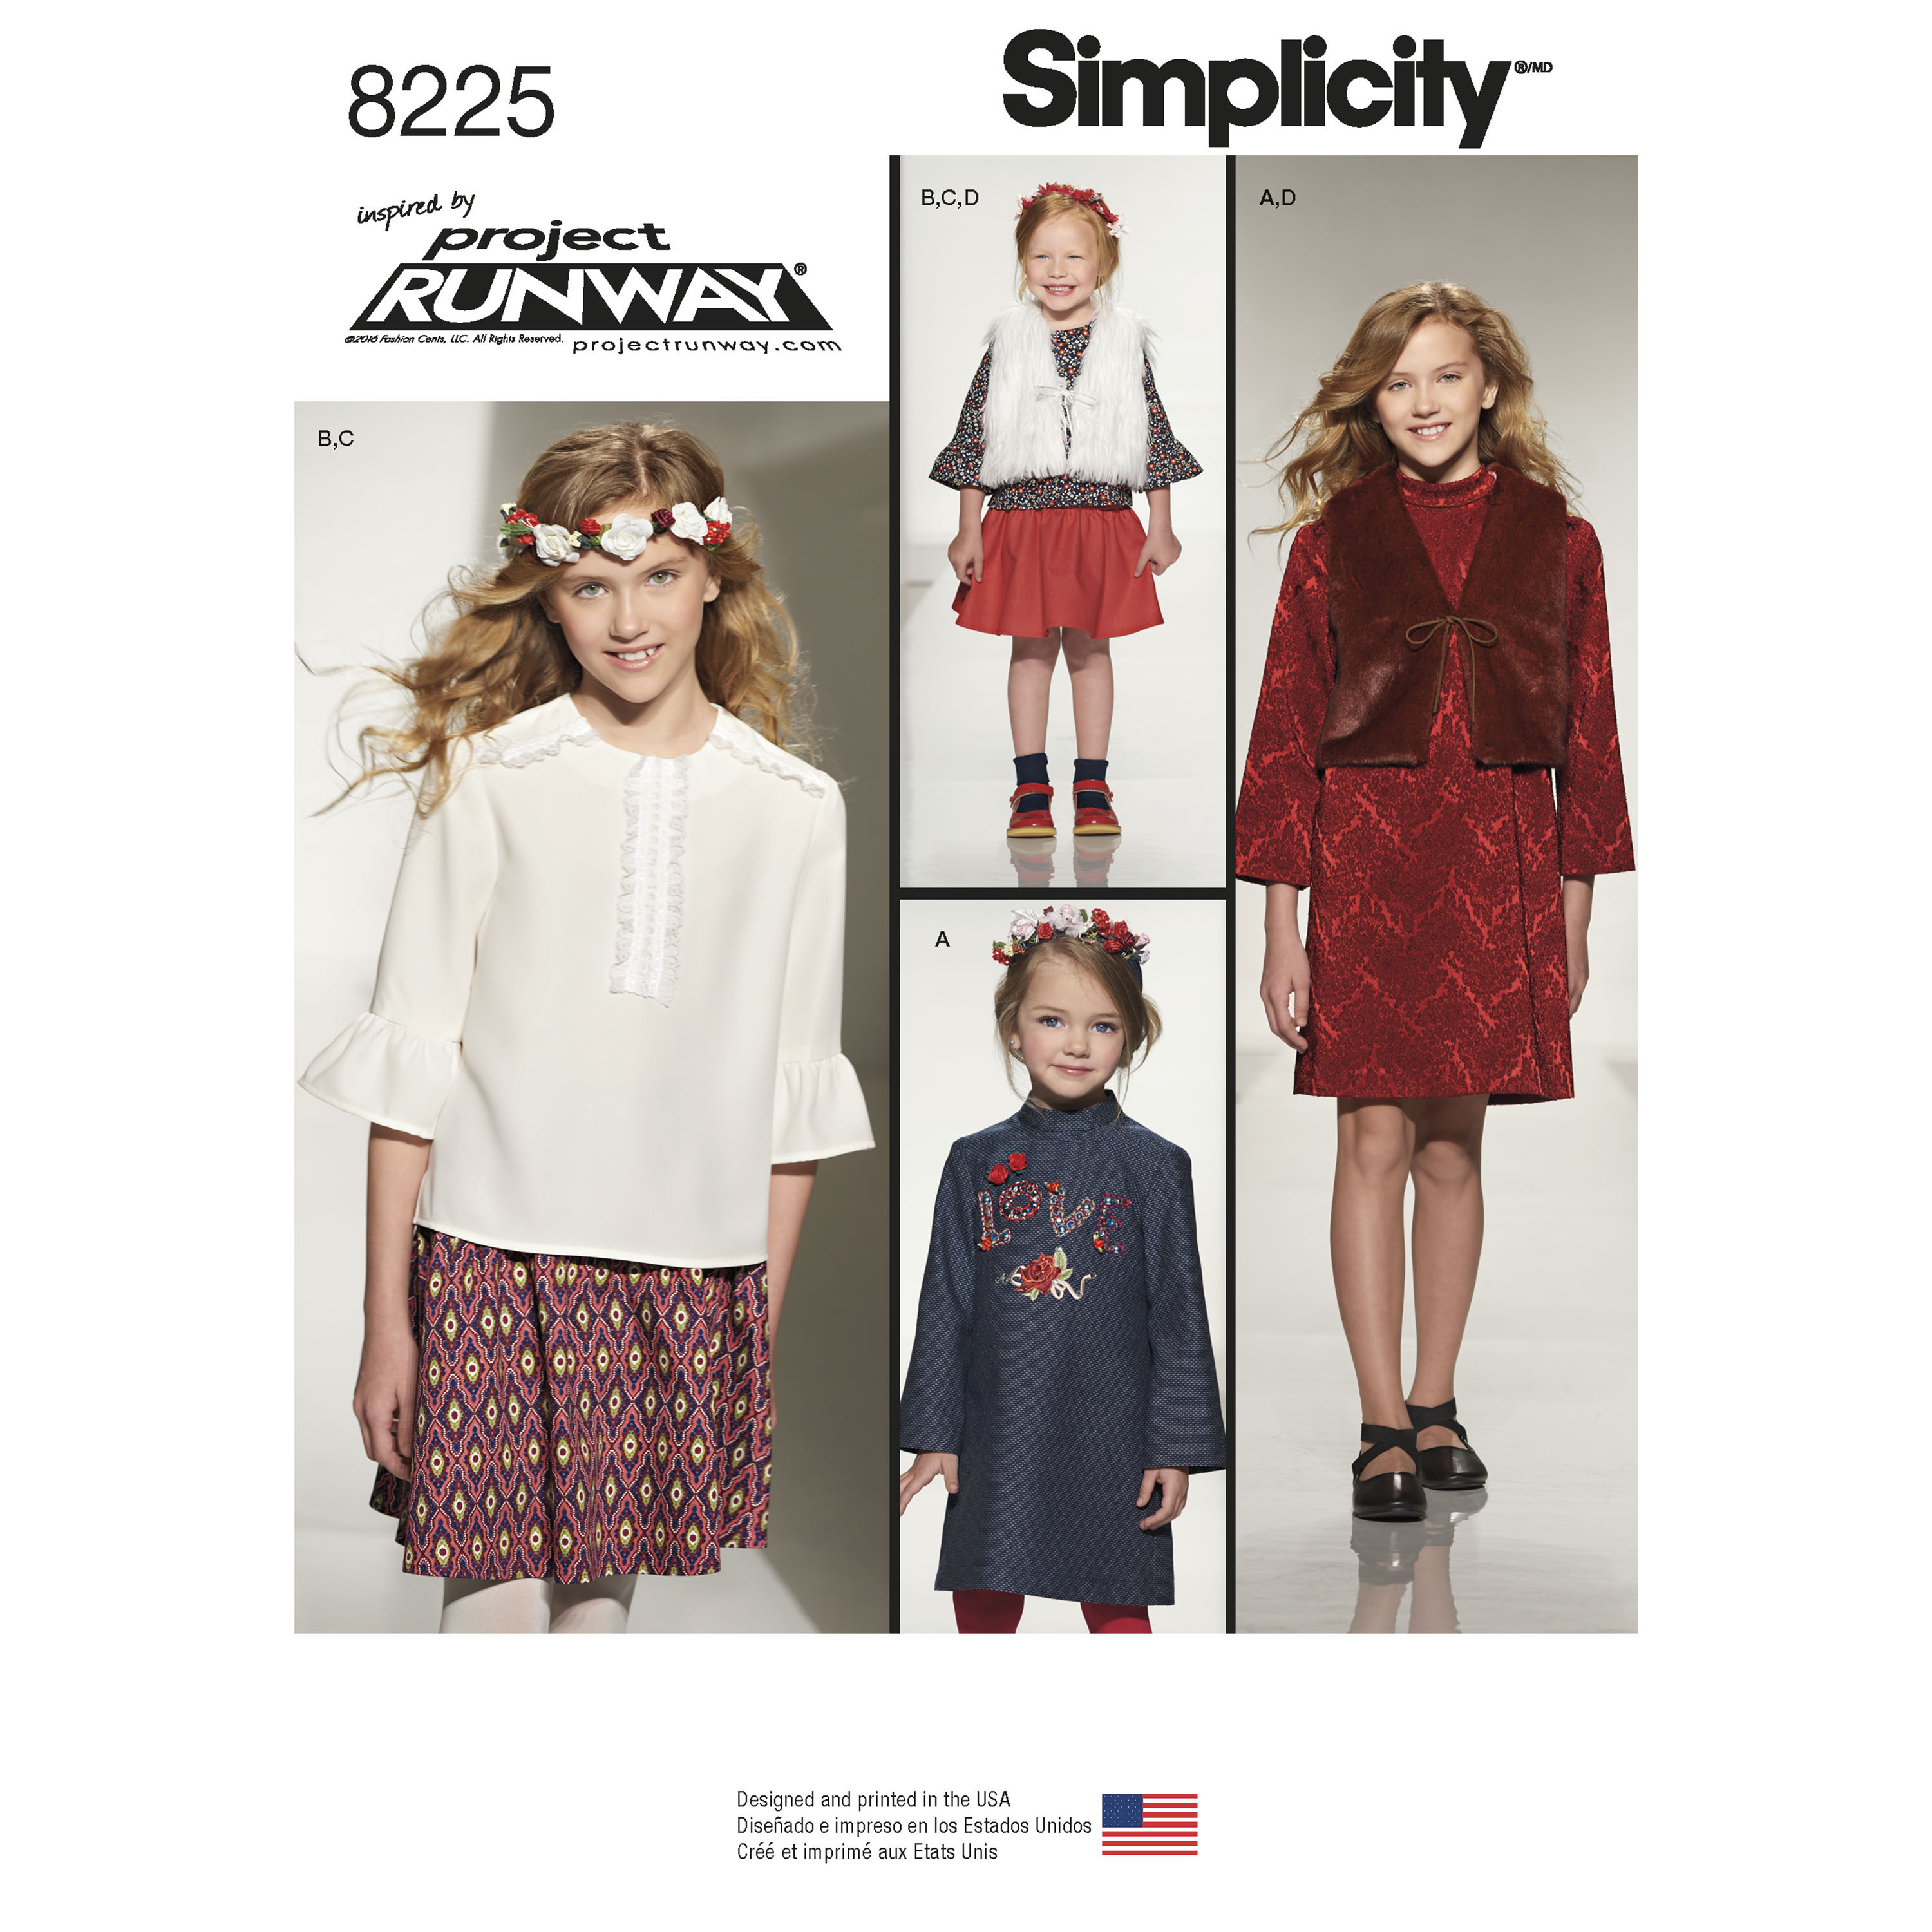 Simplicity 8225 Child's and Girls' Inspired by Project Runway Sportswear